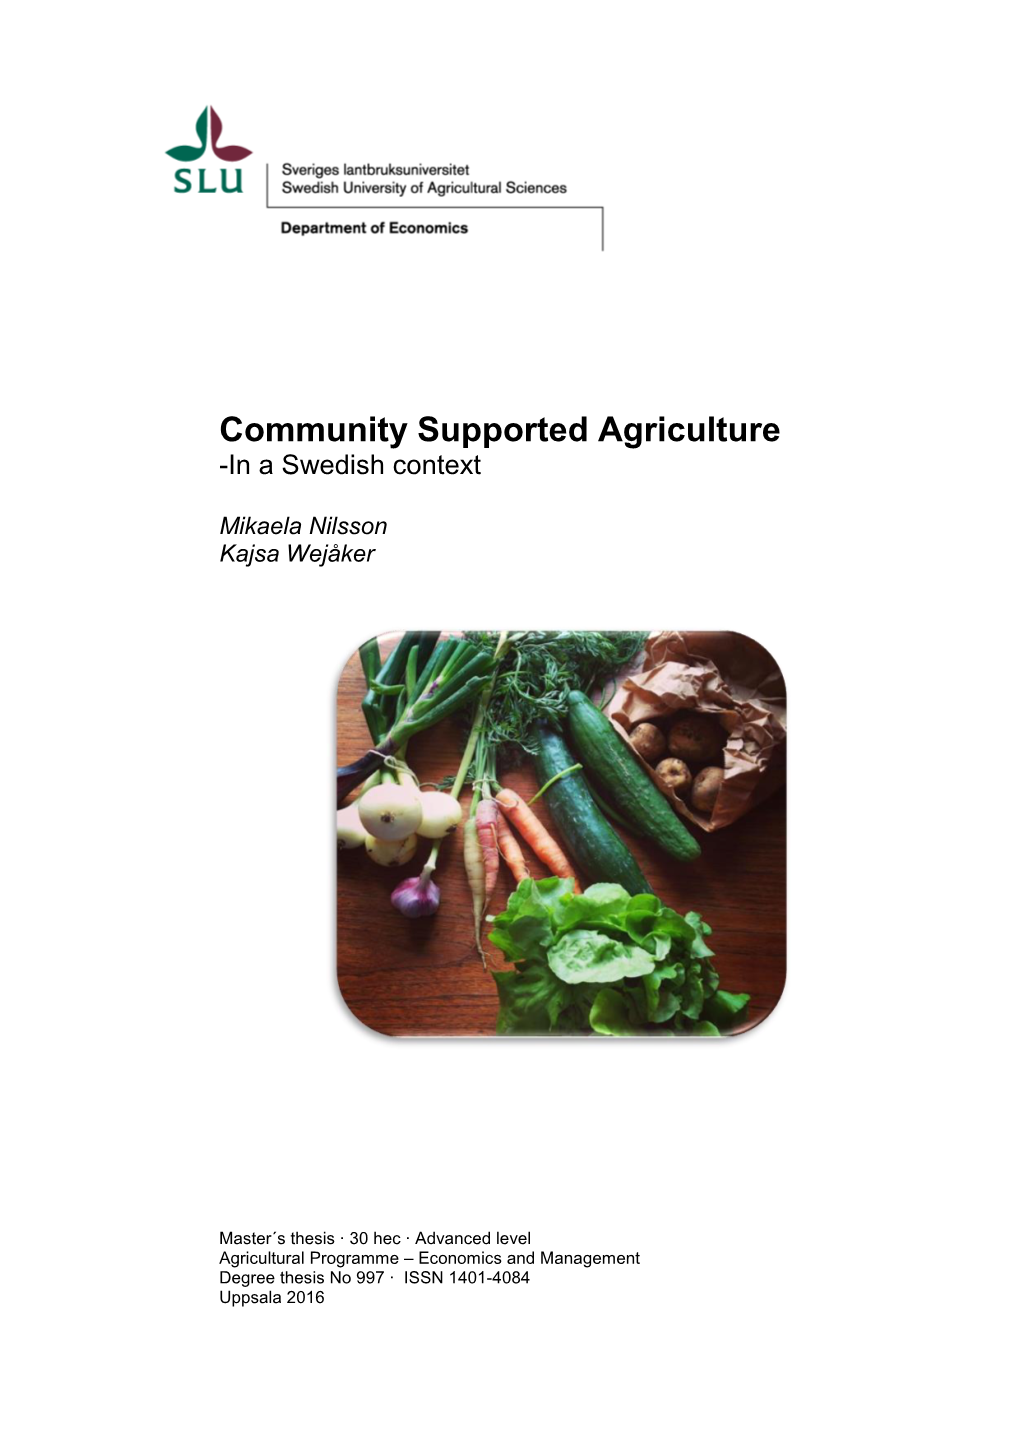 Community Supported Agriculture -In a Swedish Context